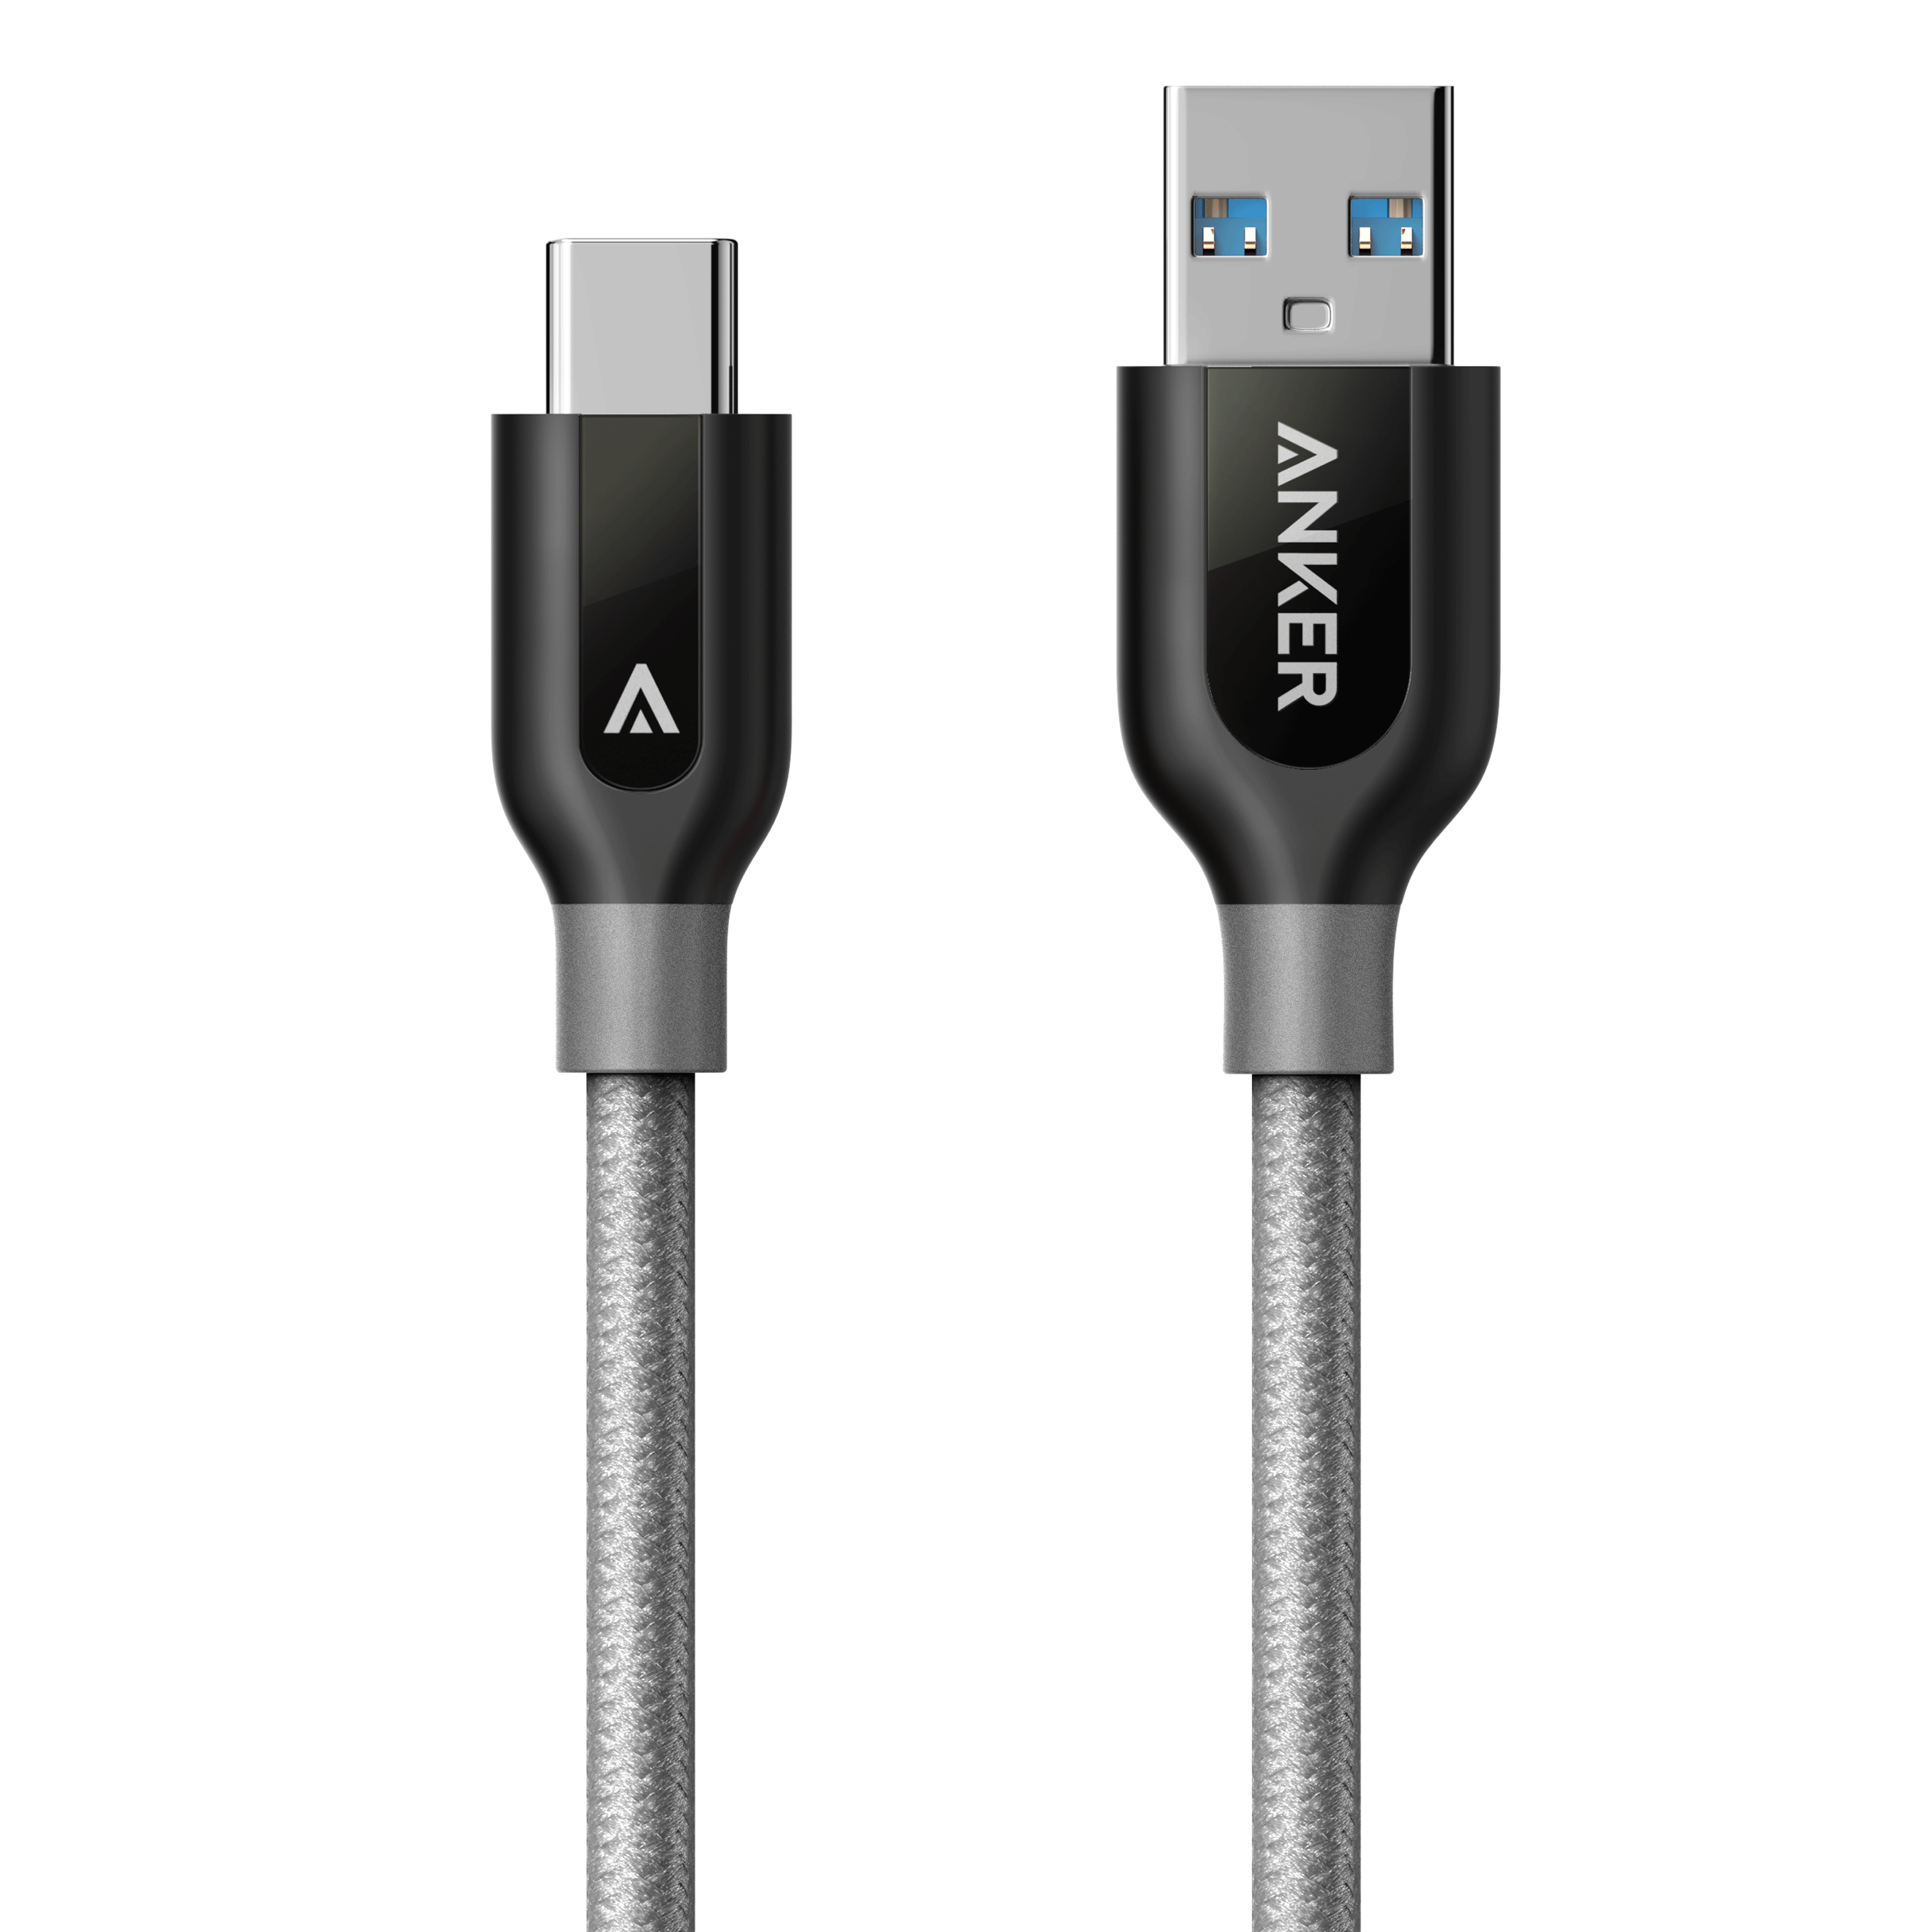 Anker Powerline+ USB Type C USB 3.0 Braided Charge/Data Cable 0.9 Meter - Gray - With Carrying Bag